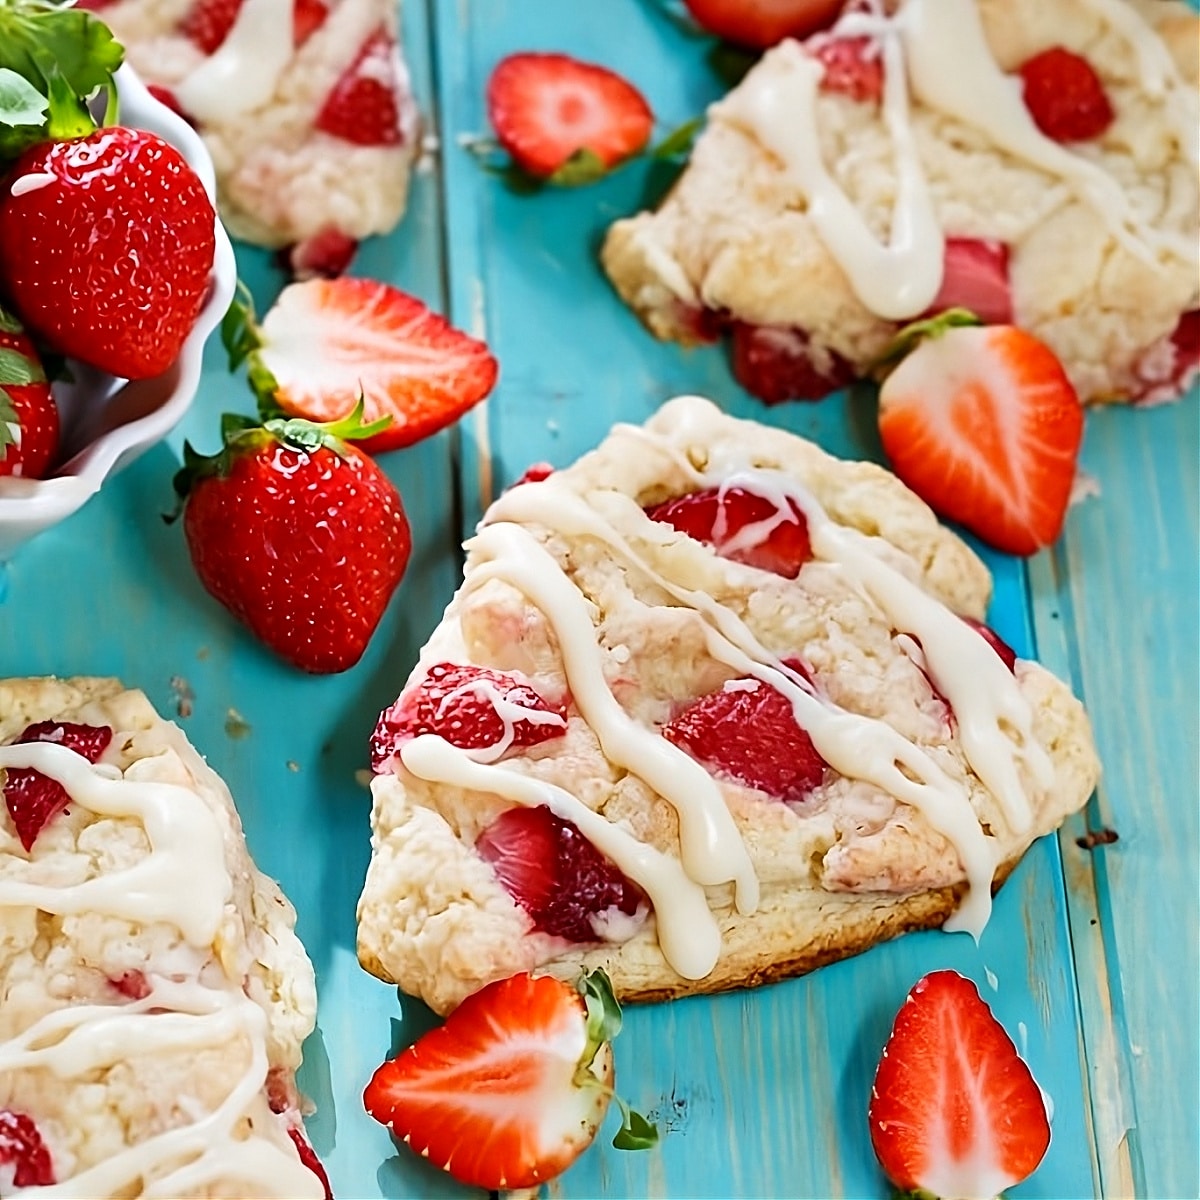 Strawberries and Cream Scones on surface with fresh strawberries.